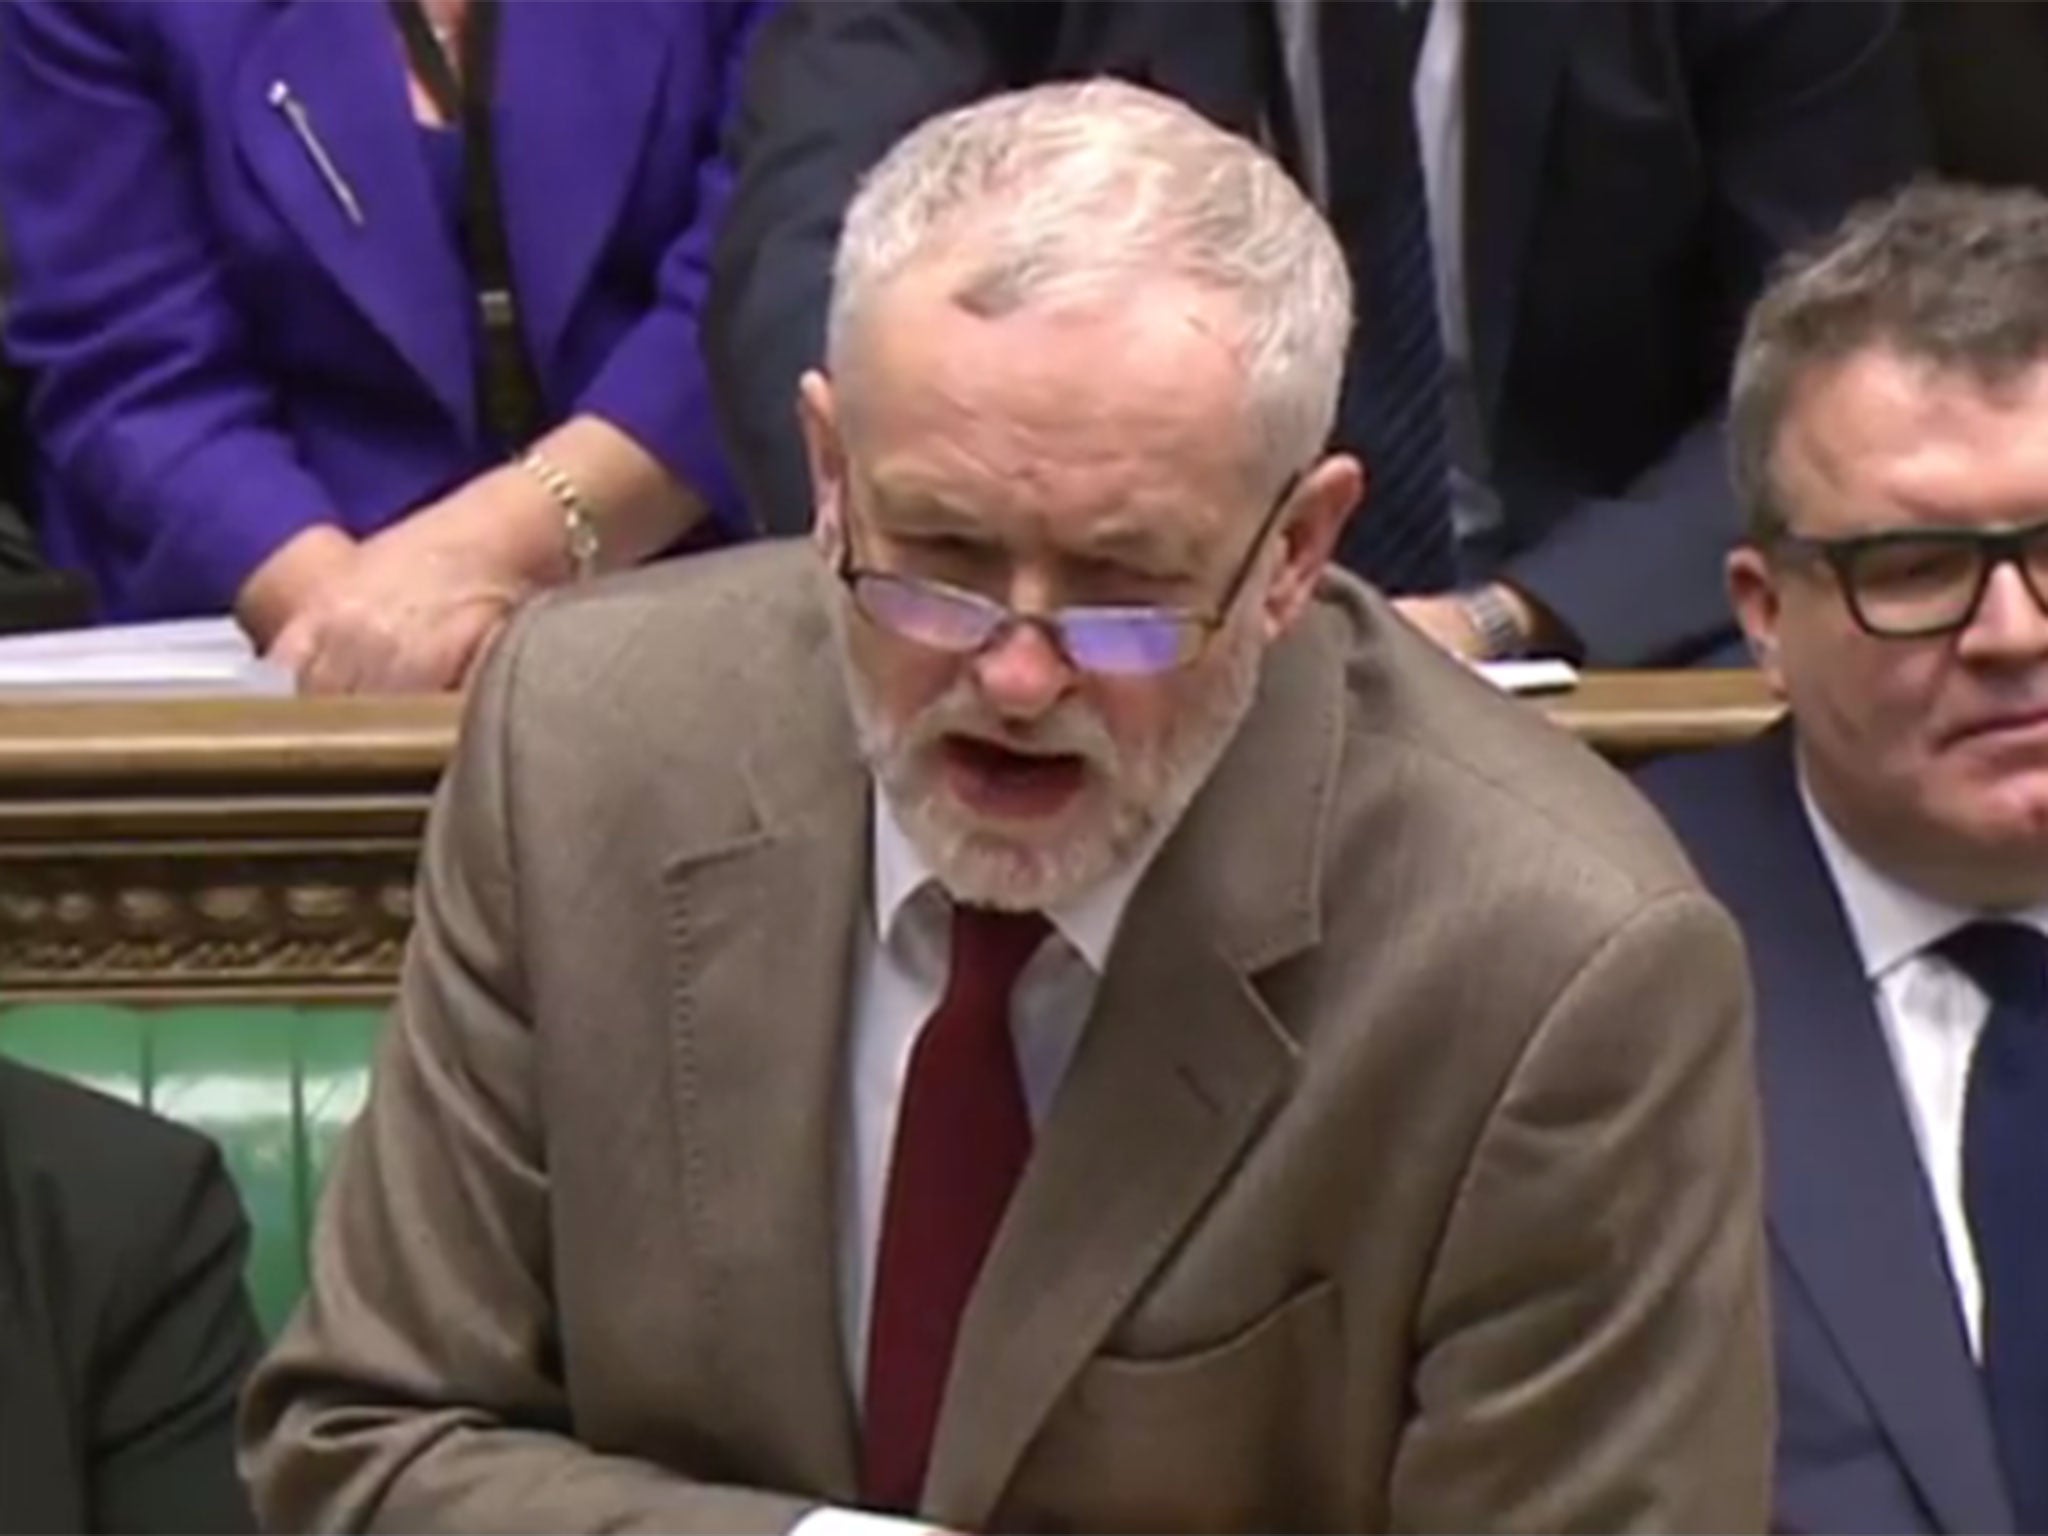 Jeremy Corbyn responds to David Cameron at PMQs on 24 February